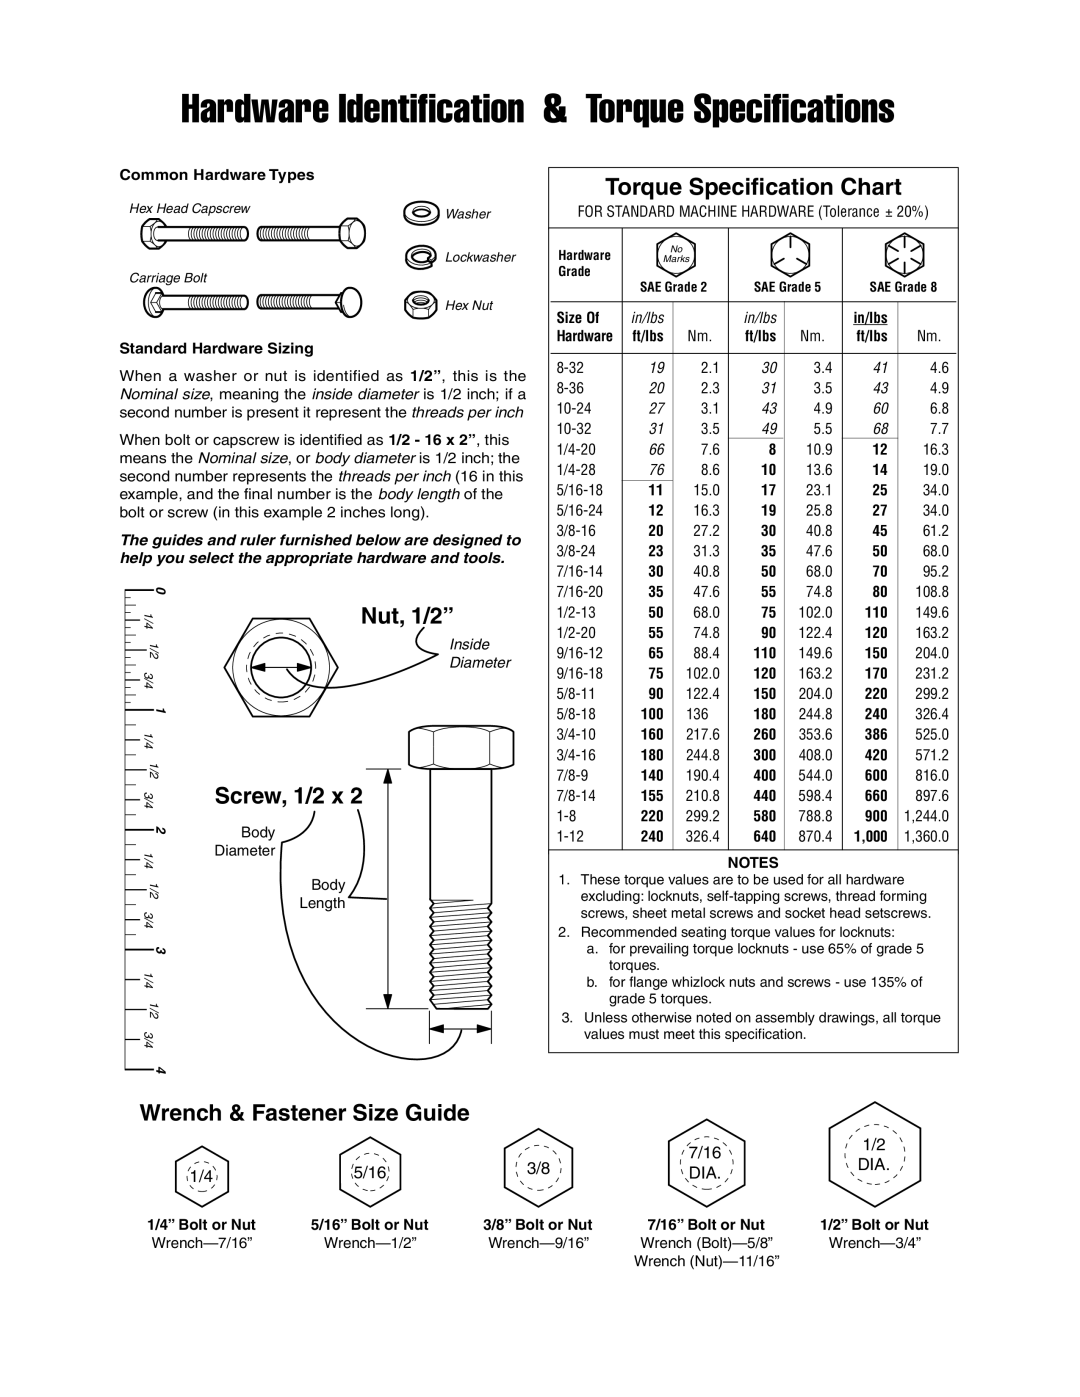 Snapper 1694508 Wrench & Fastener Size Guide, Hardware Identification & Torque Specifications, Torque Specification Chart 